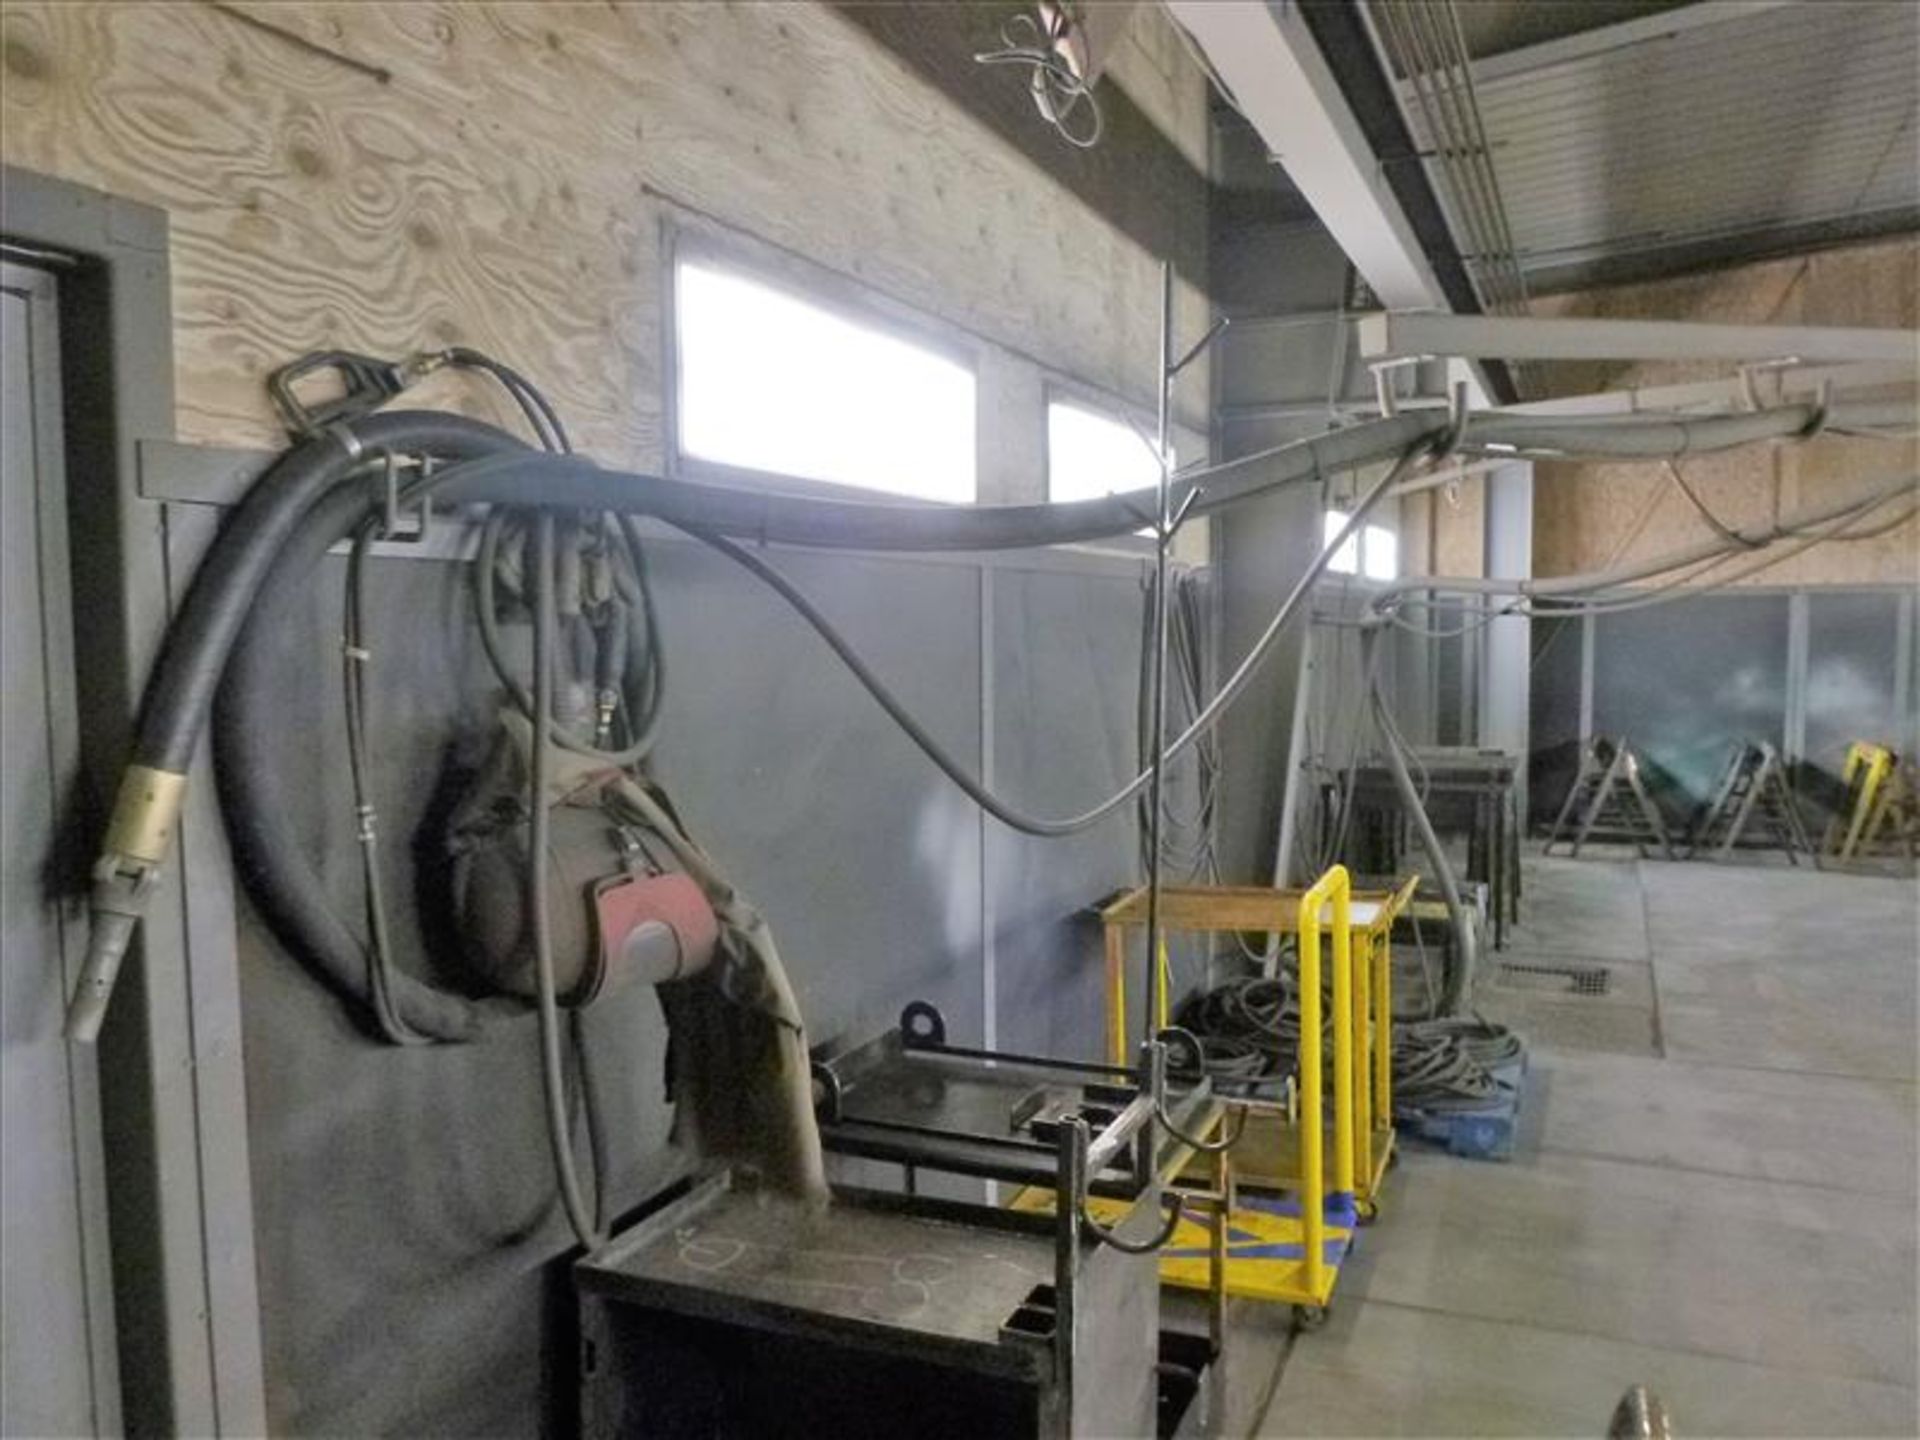 Deanco sand blasting system c/w controls, hose and boom, oxygen system and helmet (located at 164 - Image 4 of 5